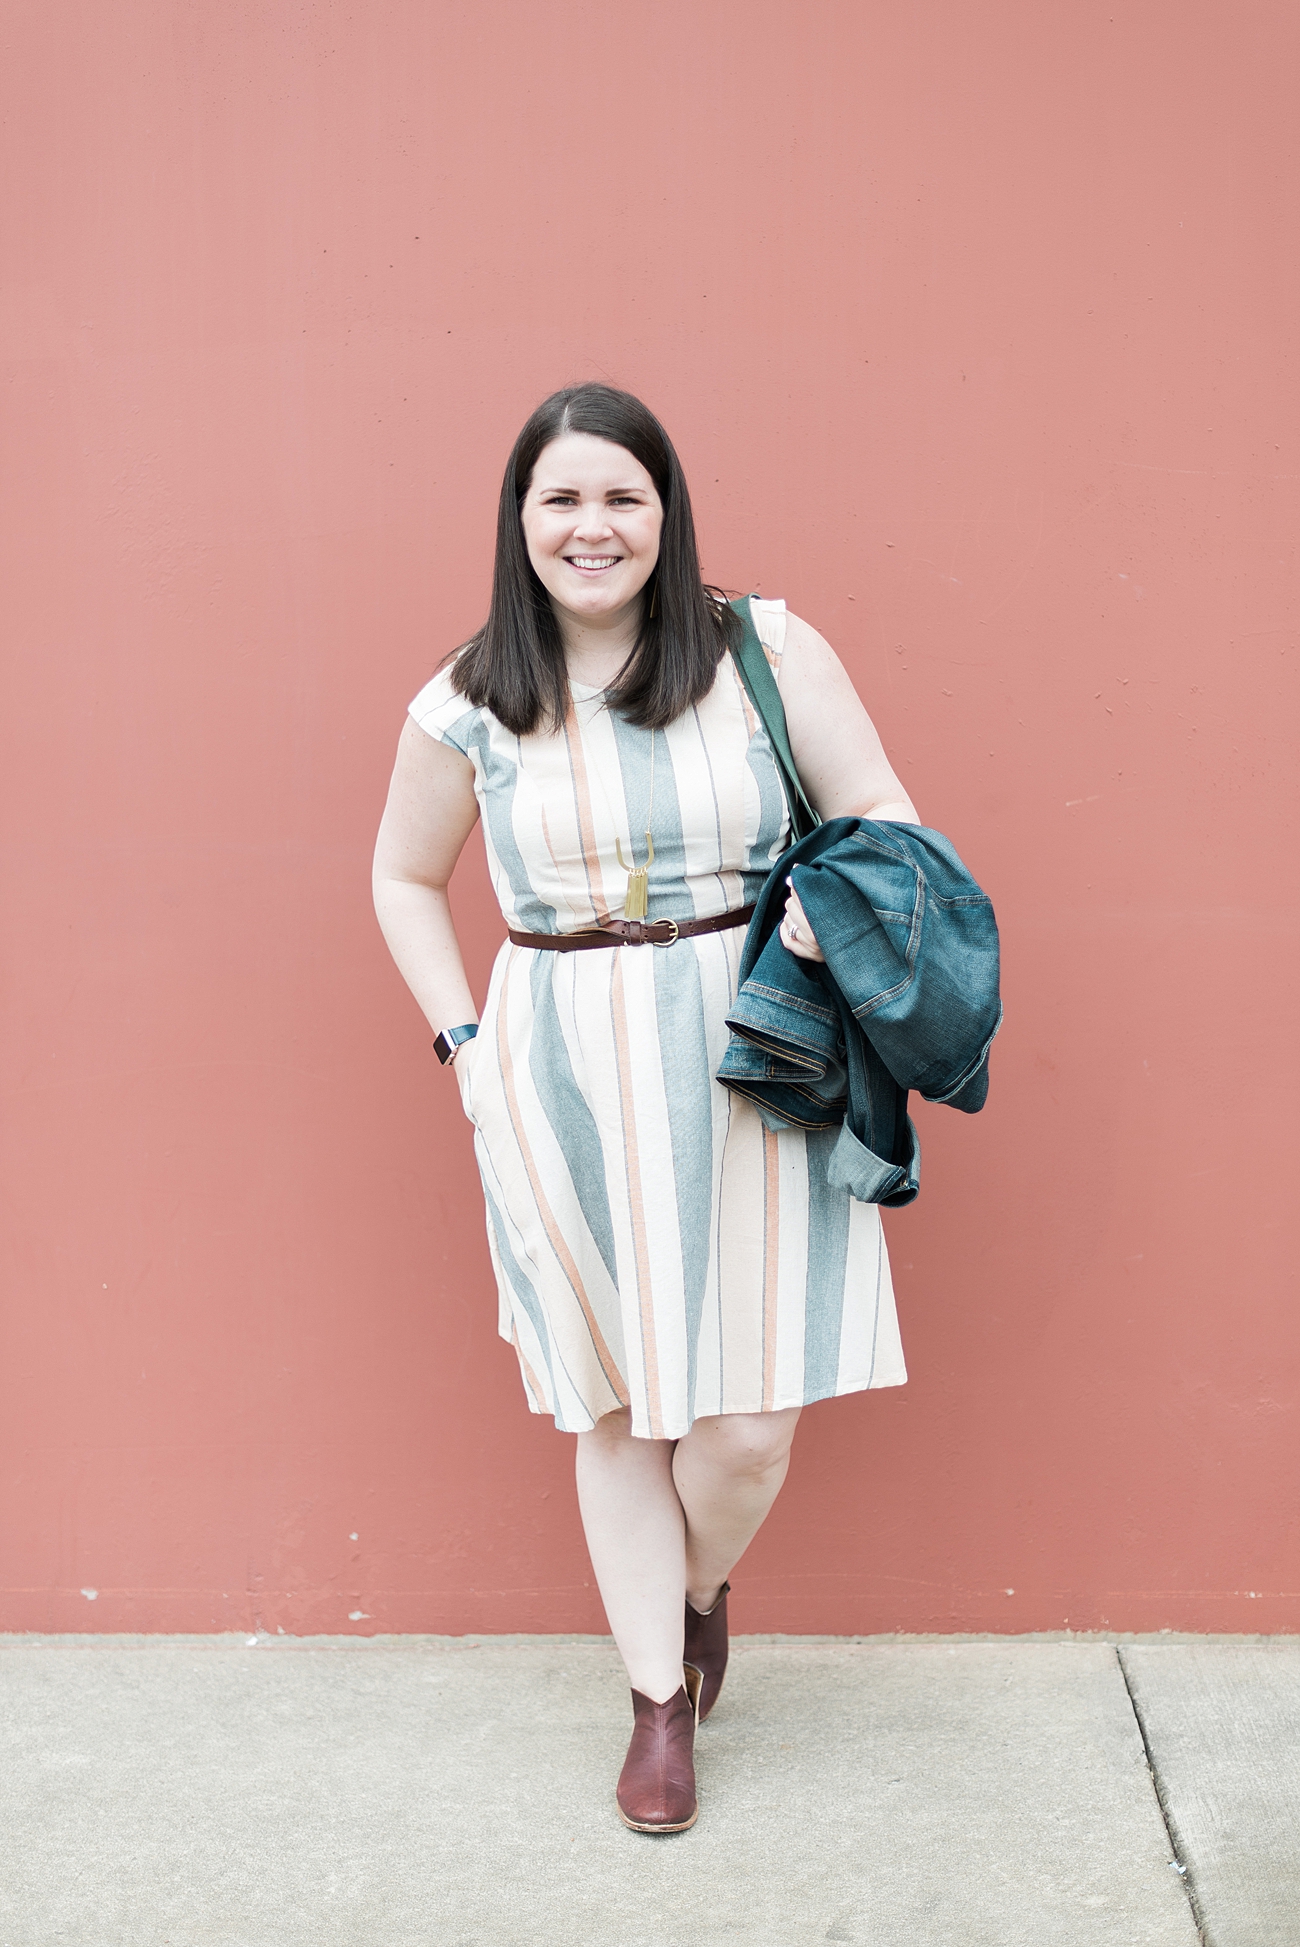 Fair Trade Fashion Blogger - Spring 2019 - Mata Traders Lovely Lines Dress Pastel Stripes, The Root Collective Lee Boots in Merlot, Rover & Kin necklace, Tribe Alive tote, Nickel & Suede earrings, denim jacket (12)